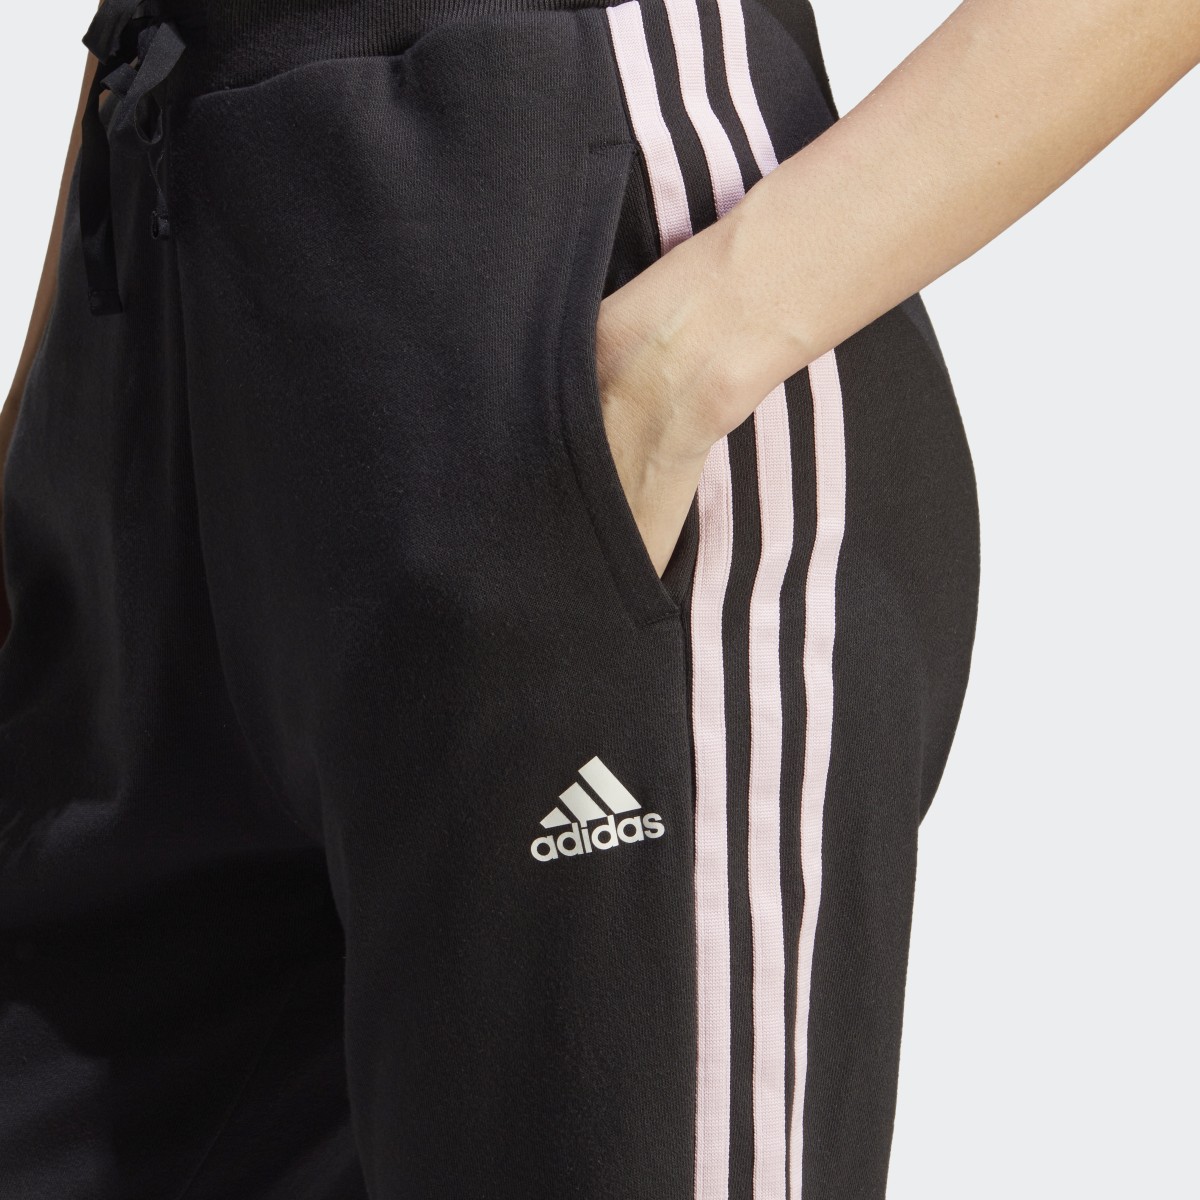 Adidas 3-Stripes High Rise Joggers with Chenille Flower Patches. 5